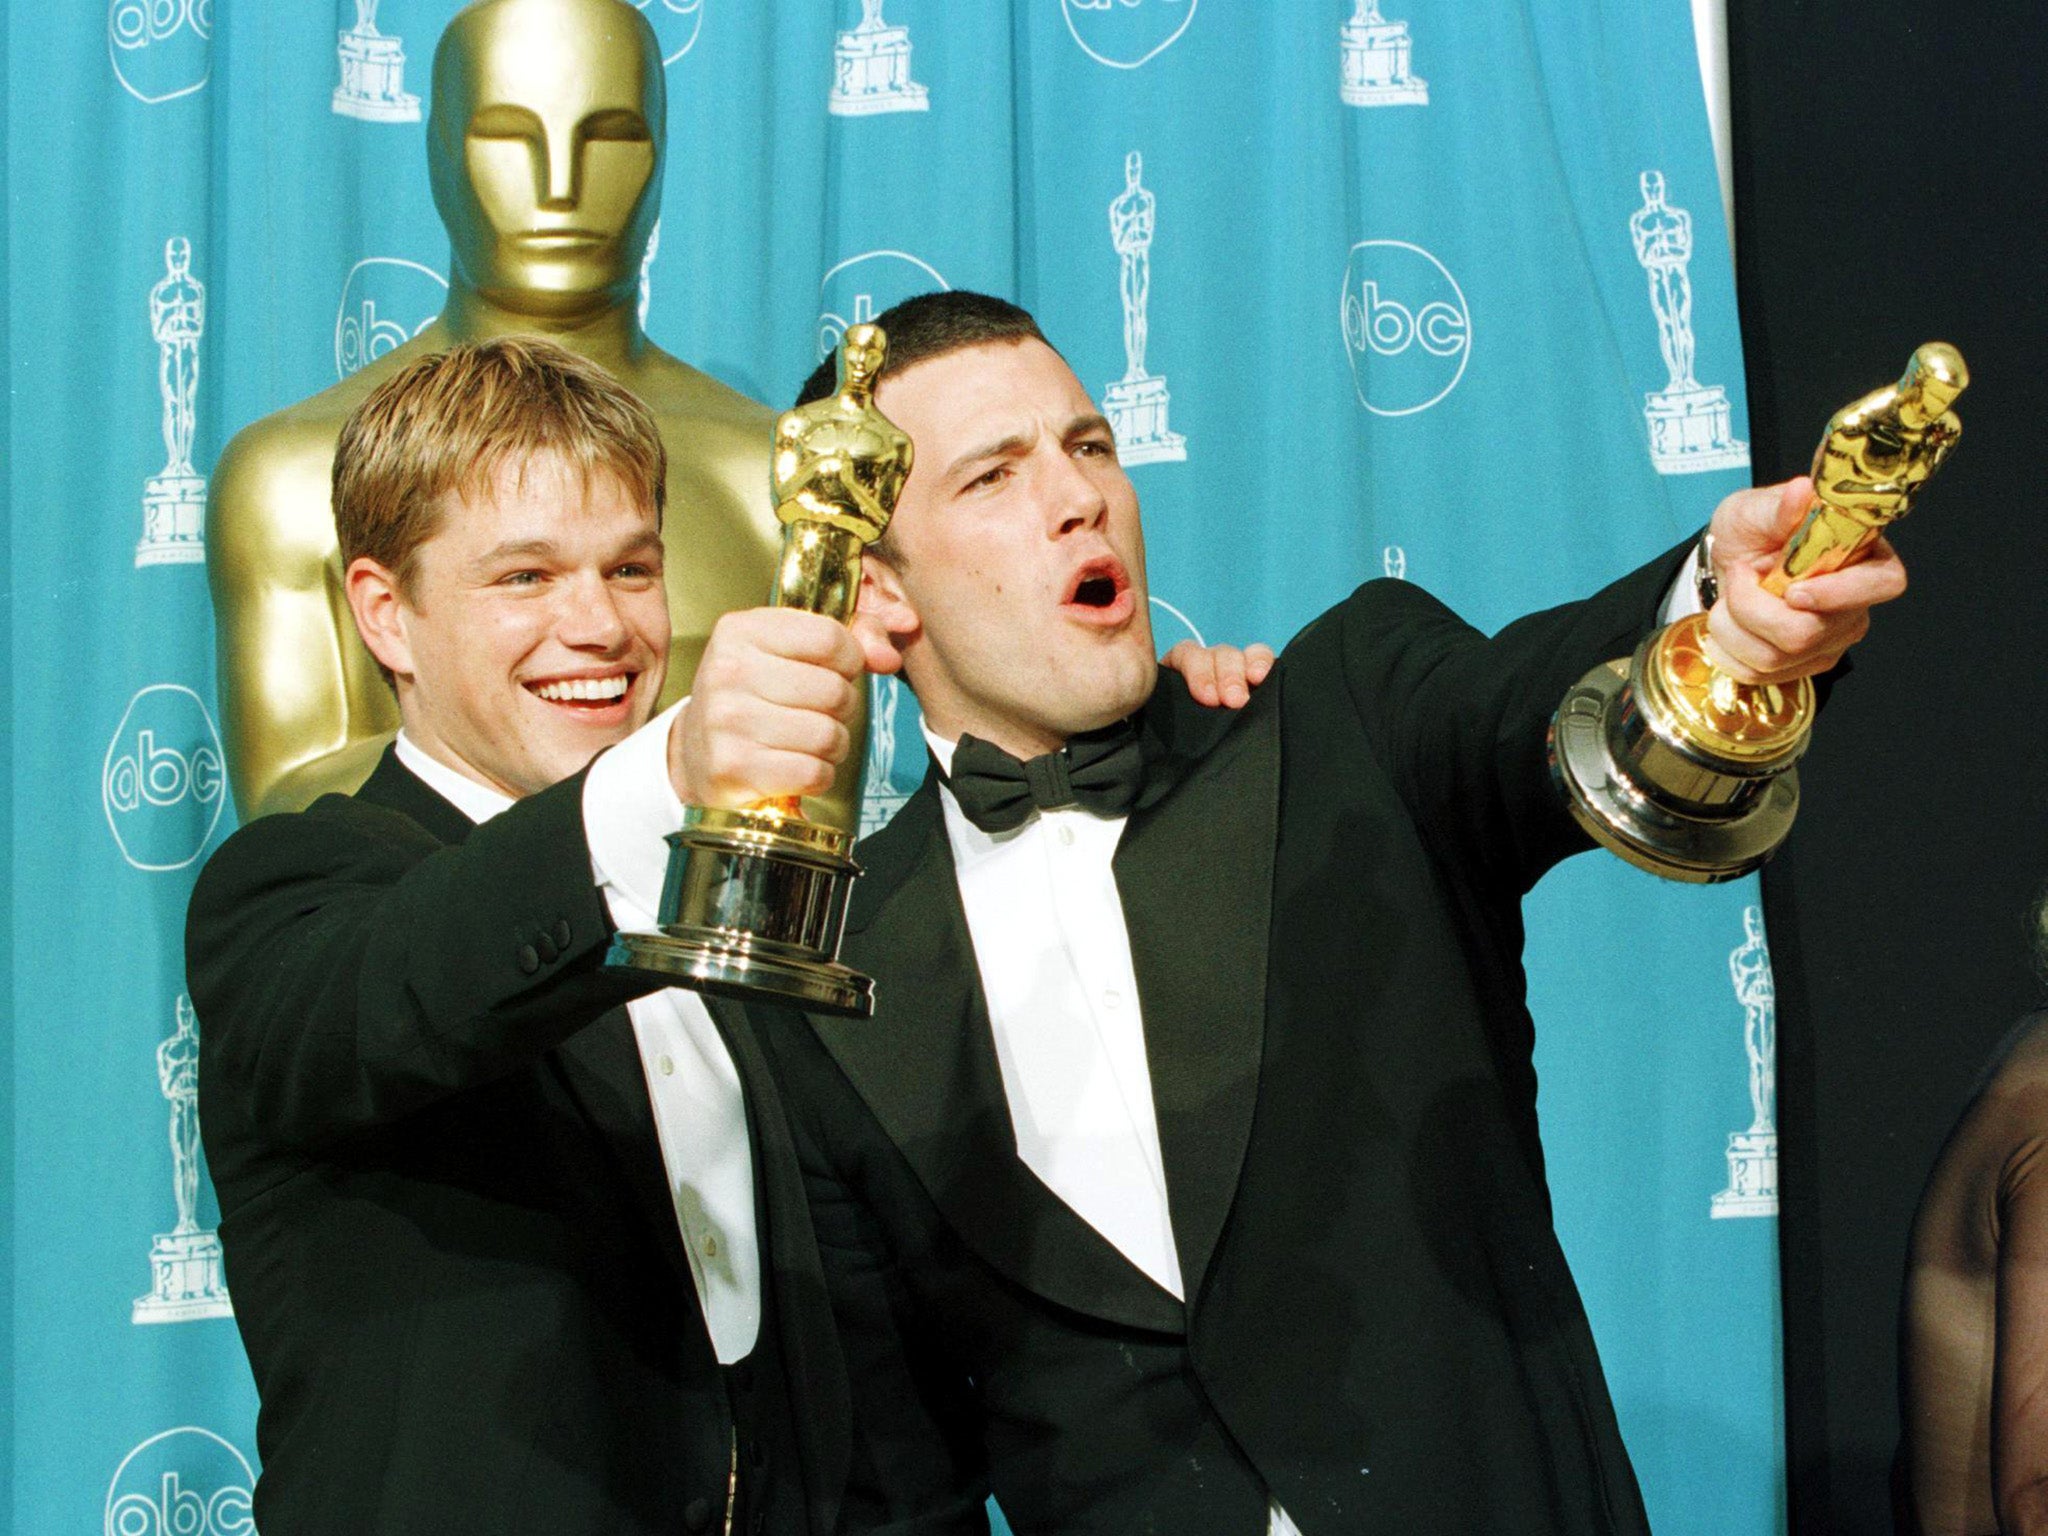 Matt Damon and Ben Affleck with their Oscars for ‘Good Will Hunting’ in 1998